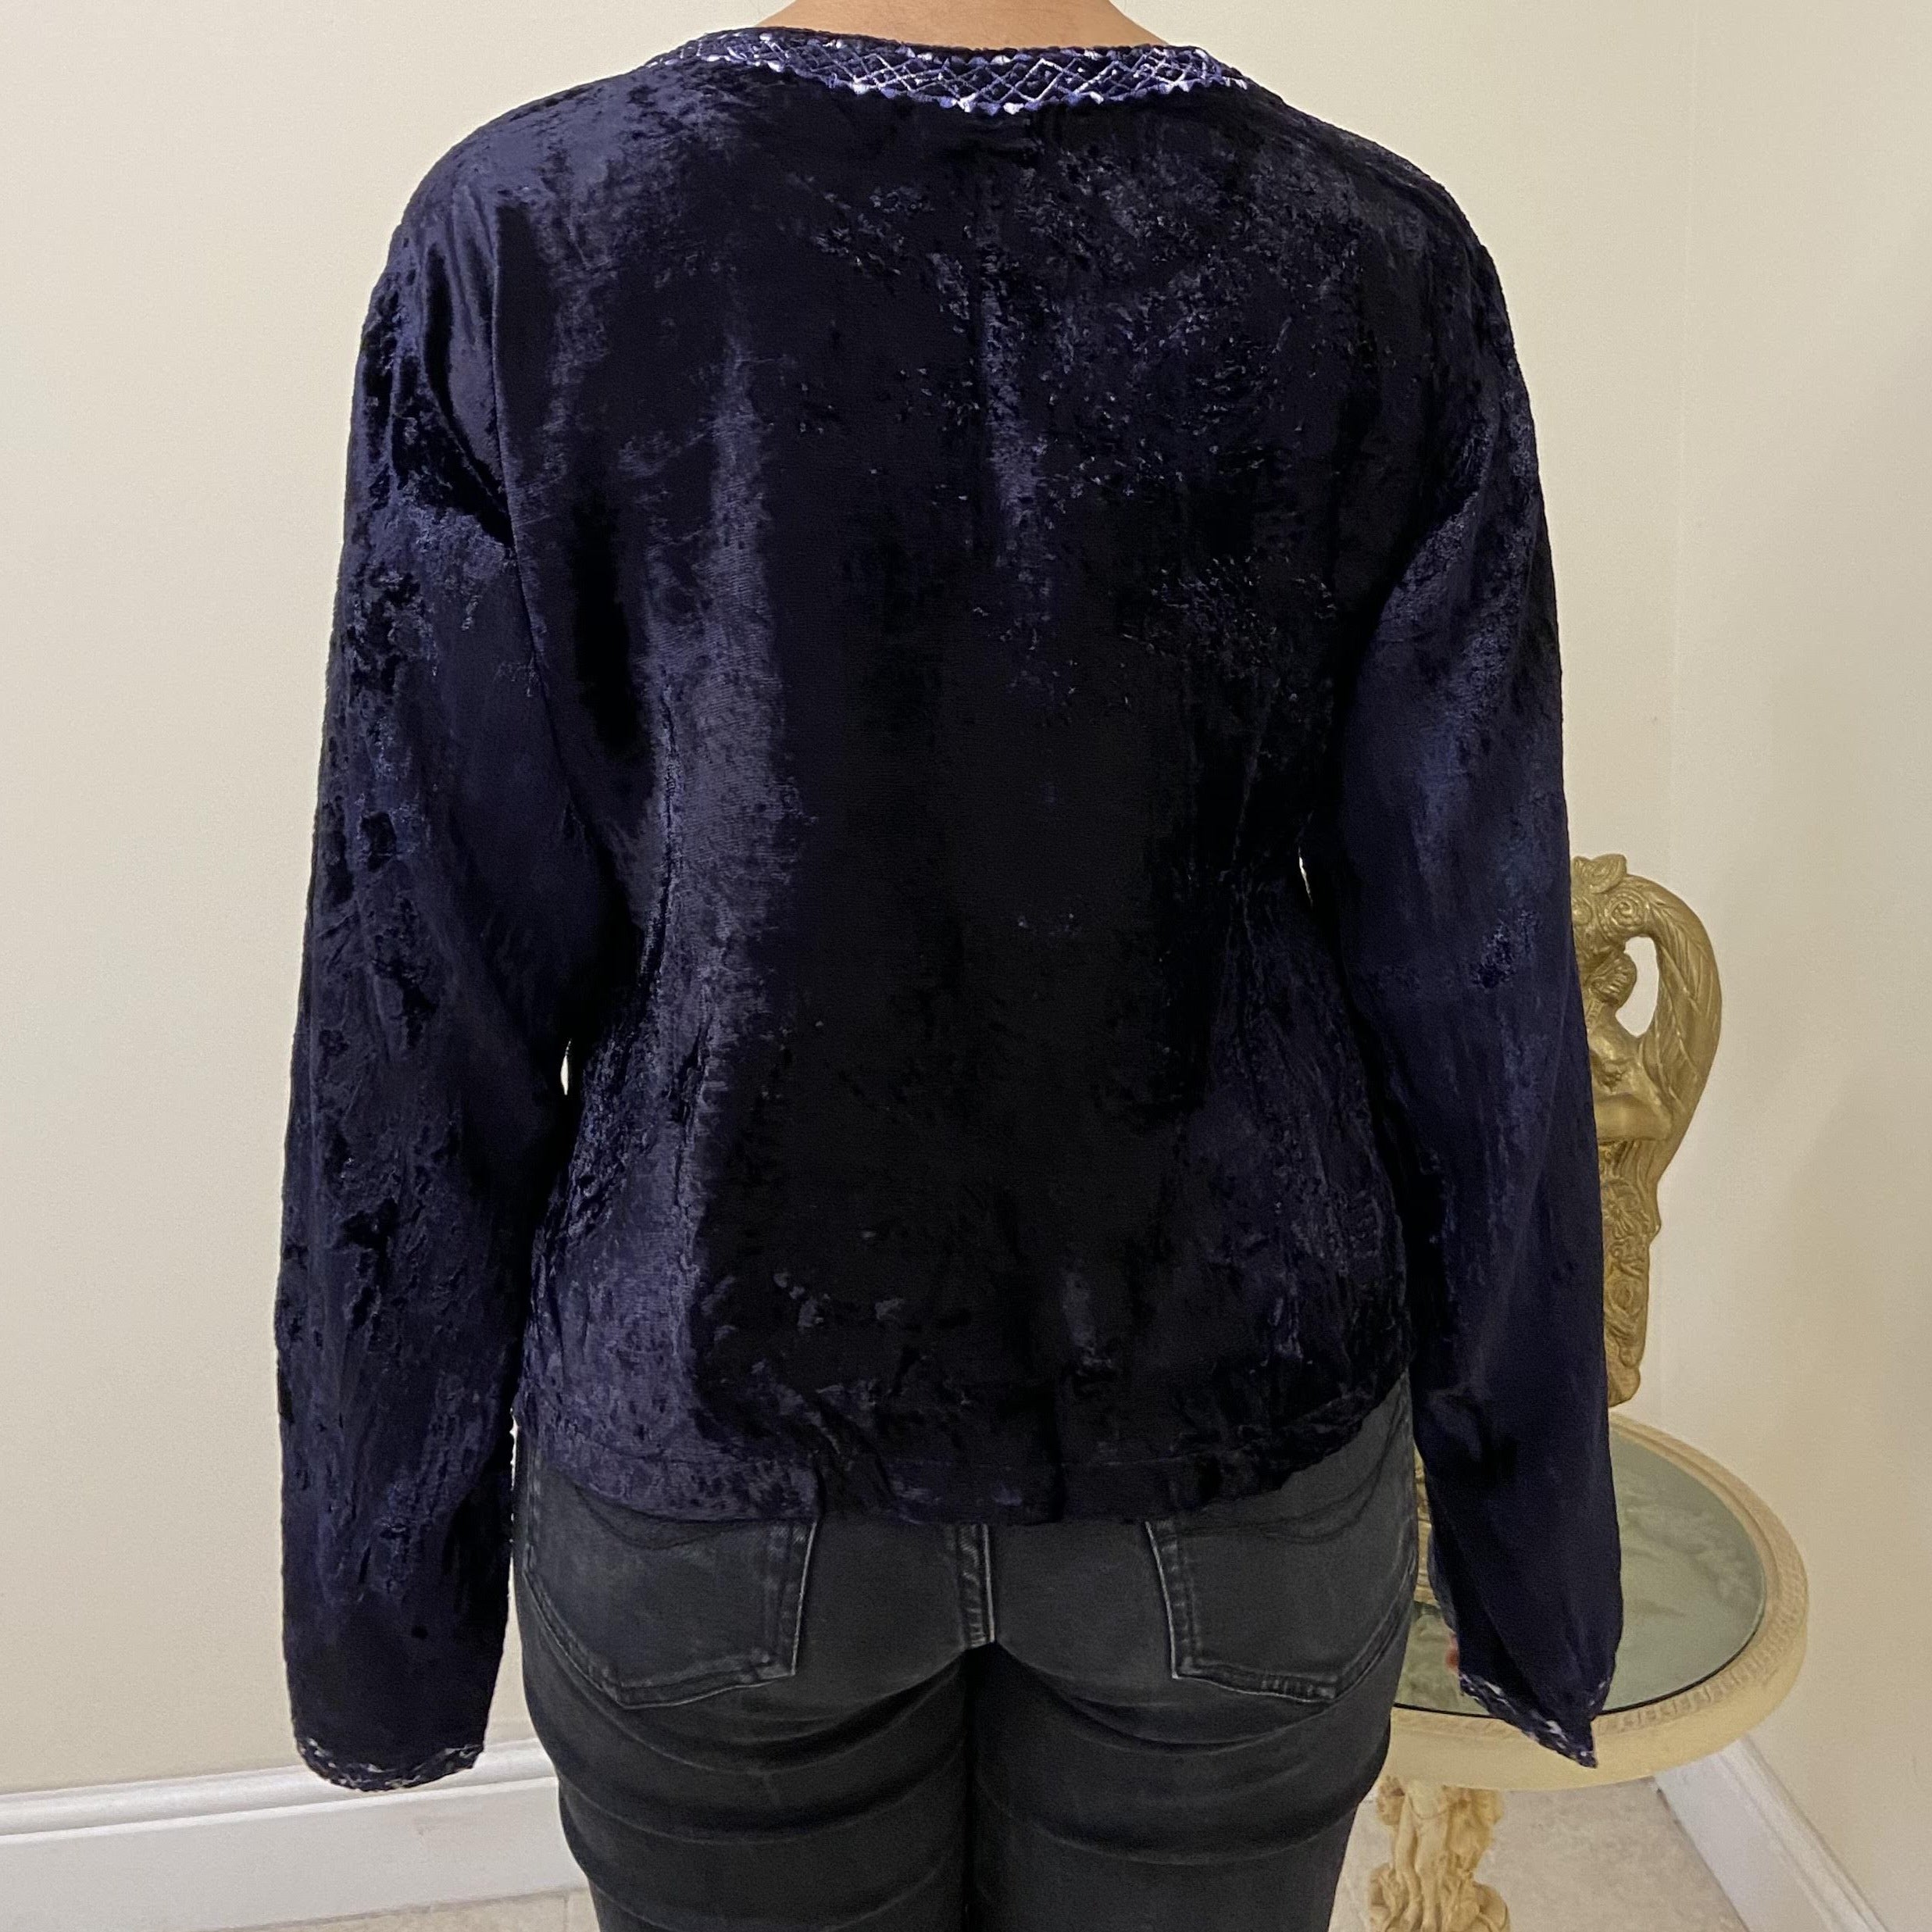 Velvet Top - Navy Blue with Assorted Coloured Embroidery